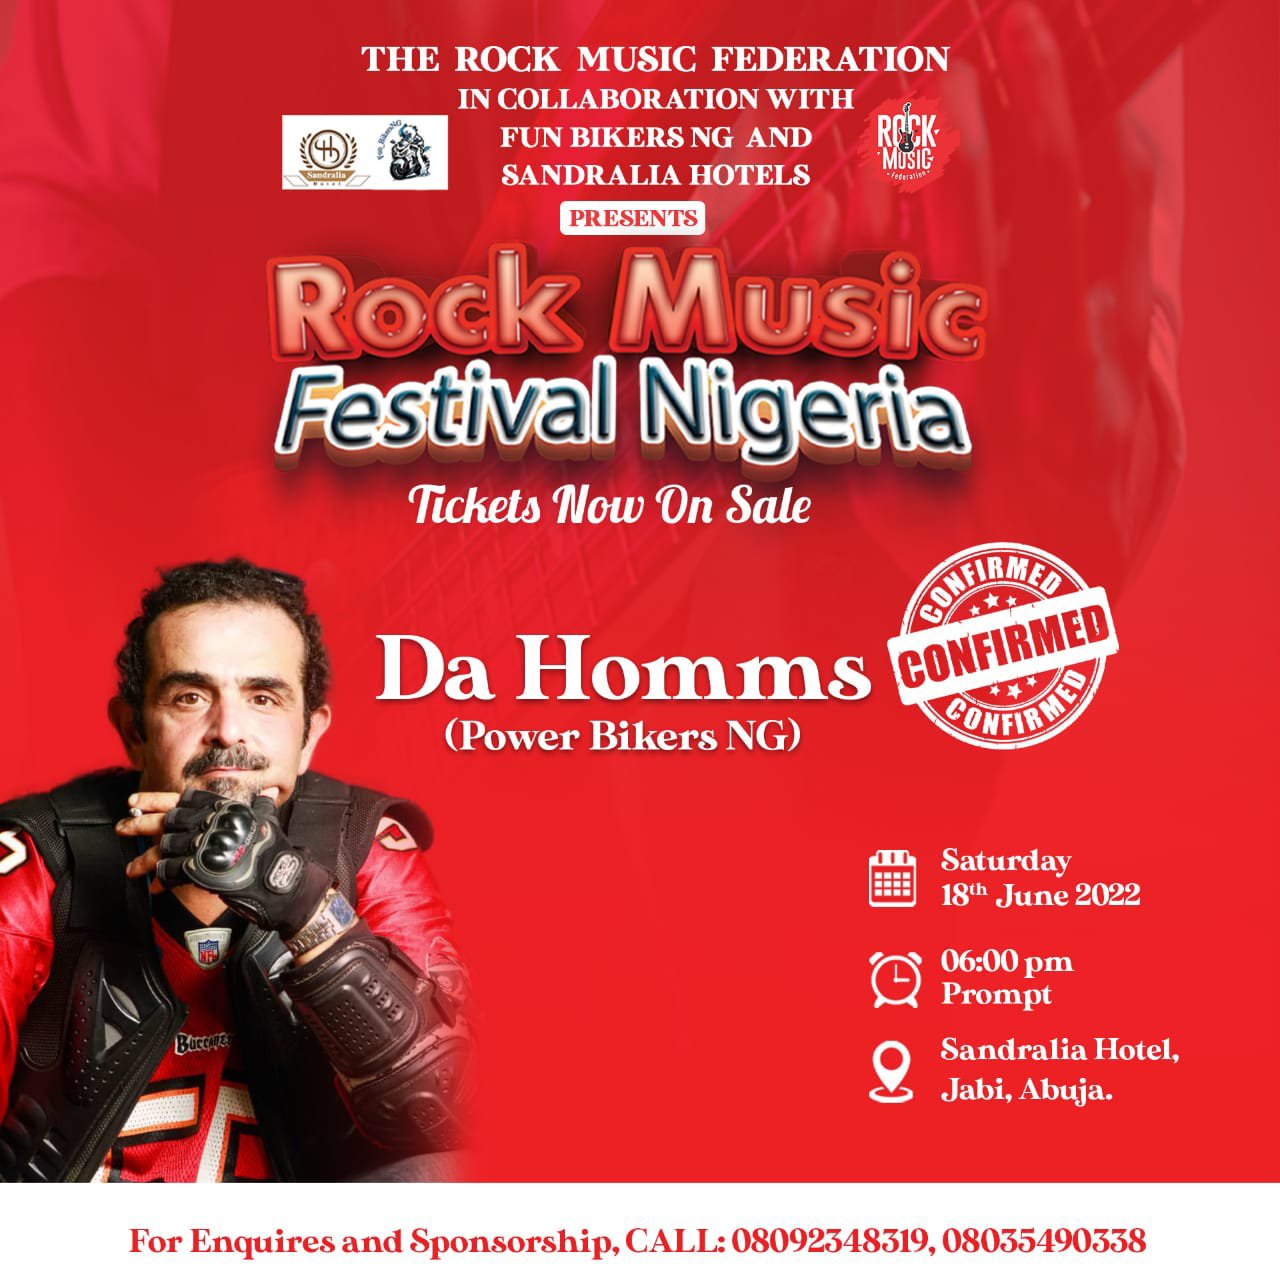 Charlie Boy, Tonto Dikeh, Chucks D General Confirmed For Rock Music Festival Nigeria 2022 - See List  of Confirmed Persons